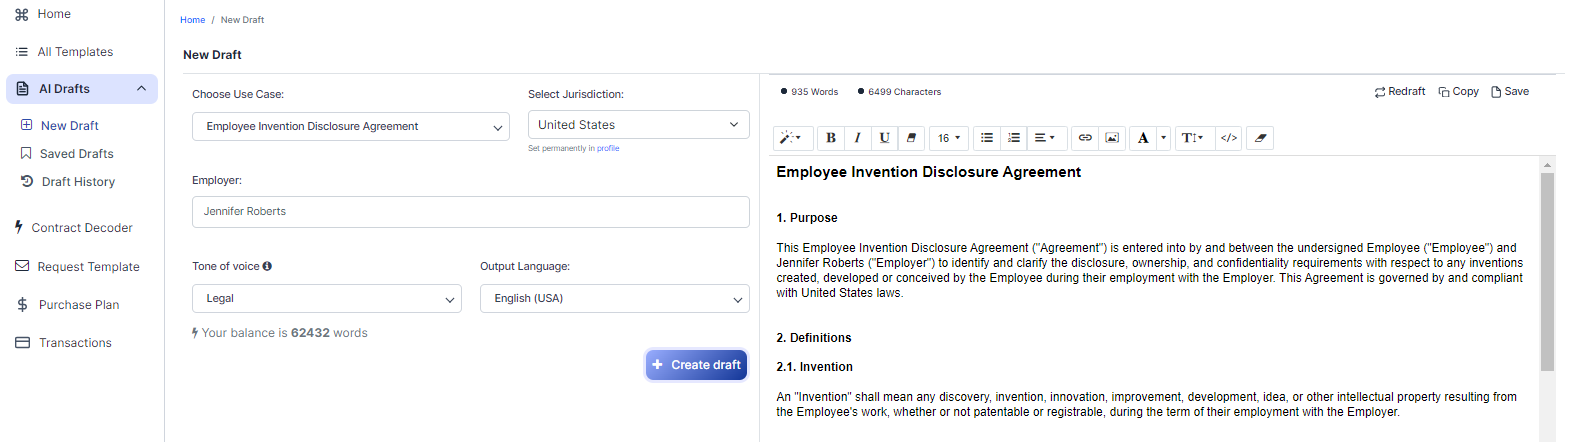 Employee Invention Disclosure Agreement template